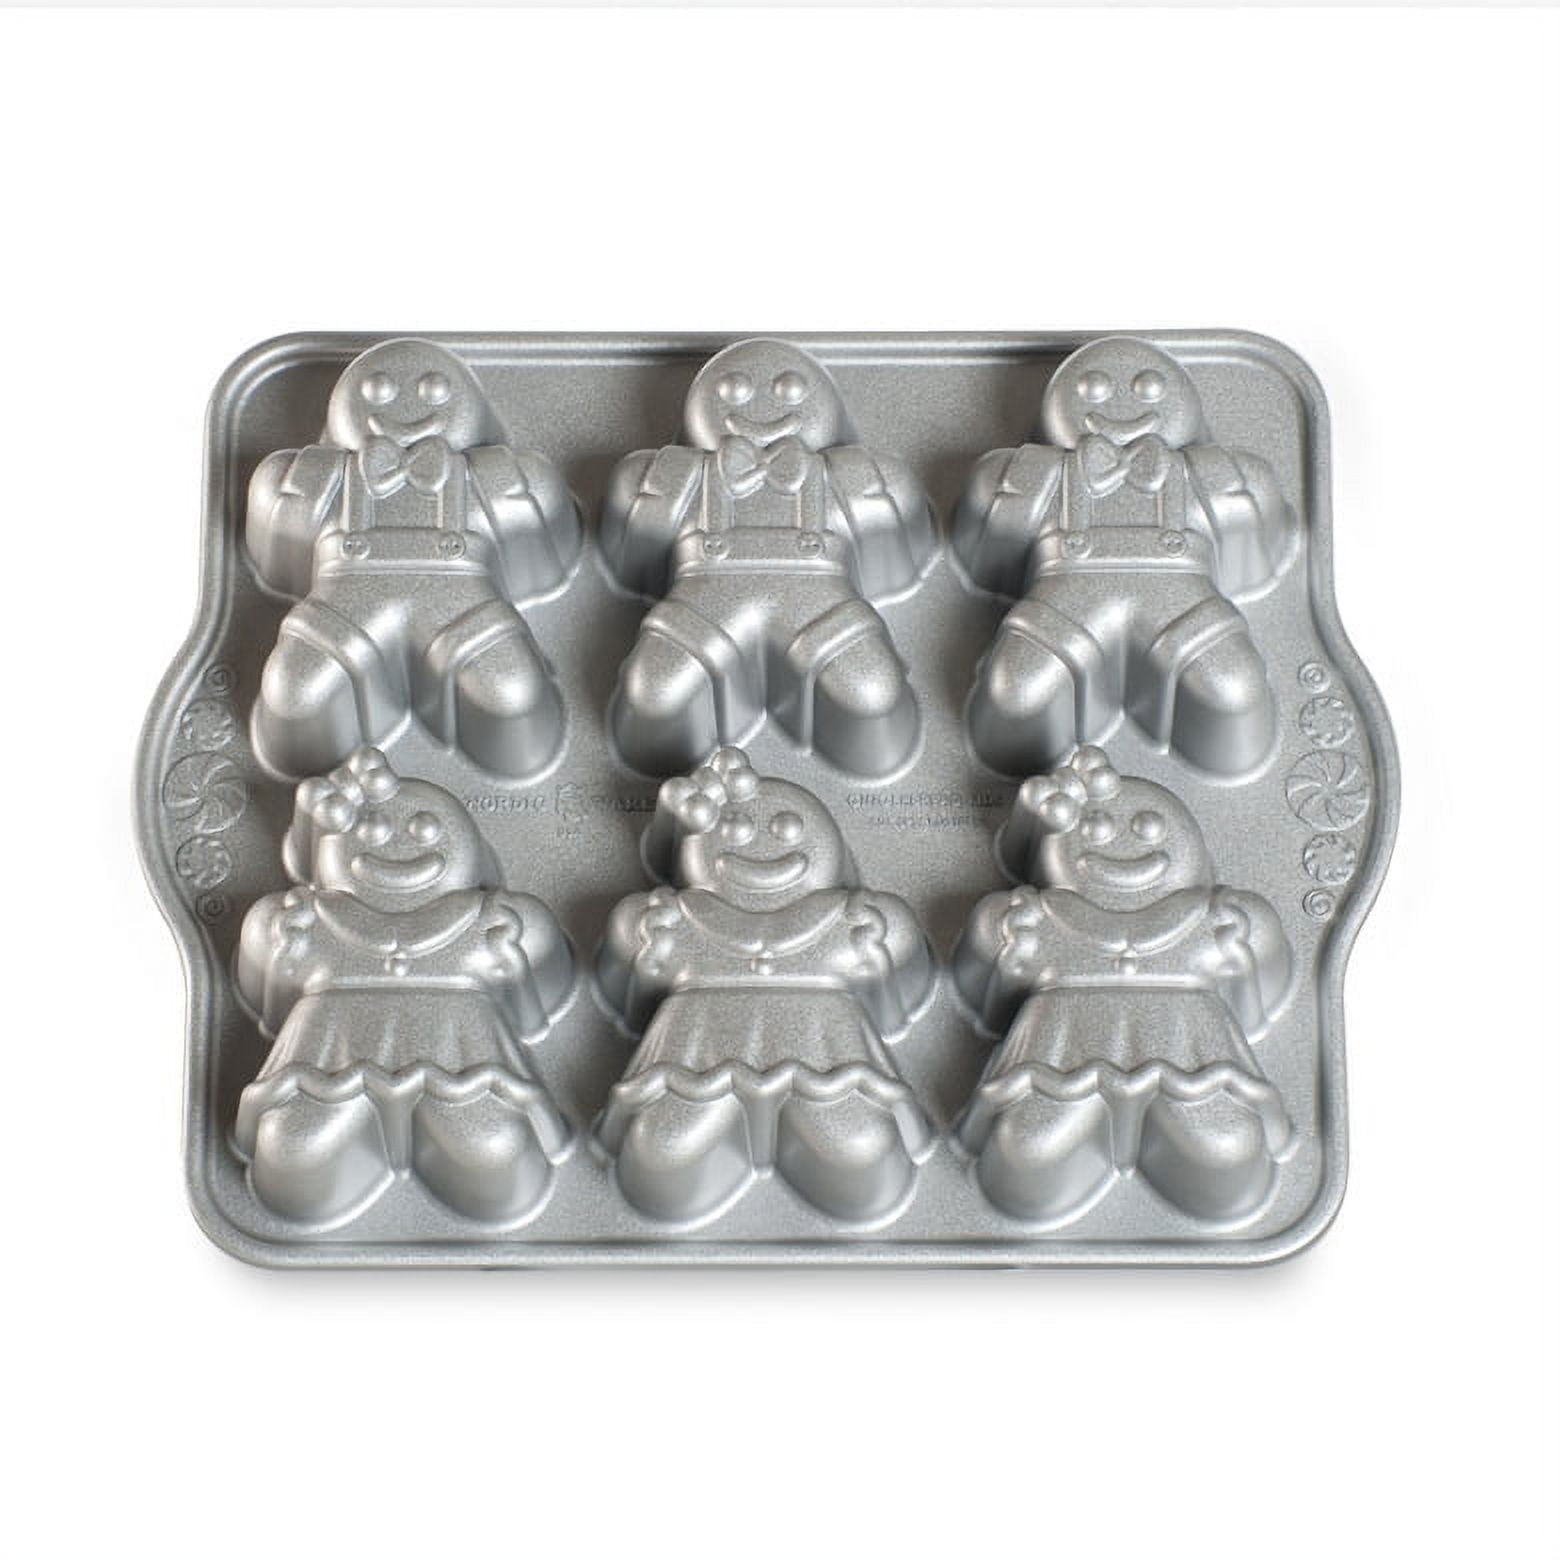  Wehome Gingerbread Cake Pan Cakelet Pan，Non-stick Cast Aluminum  Muffin Pan，12-Cavity Snowman and Christmas Tree Gingerbread Baking Pan，Heavy-gauge  Bakeware Pan: Home & Kitchen